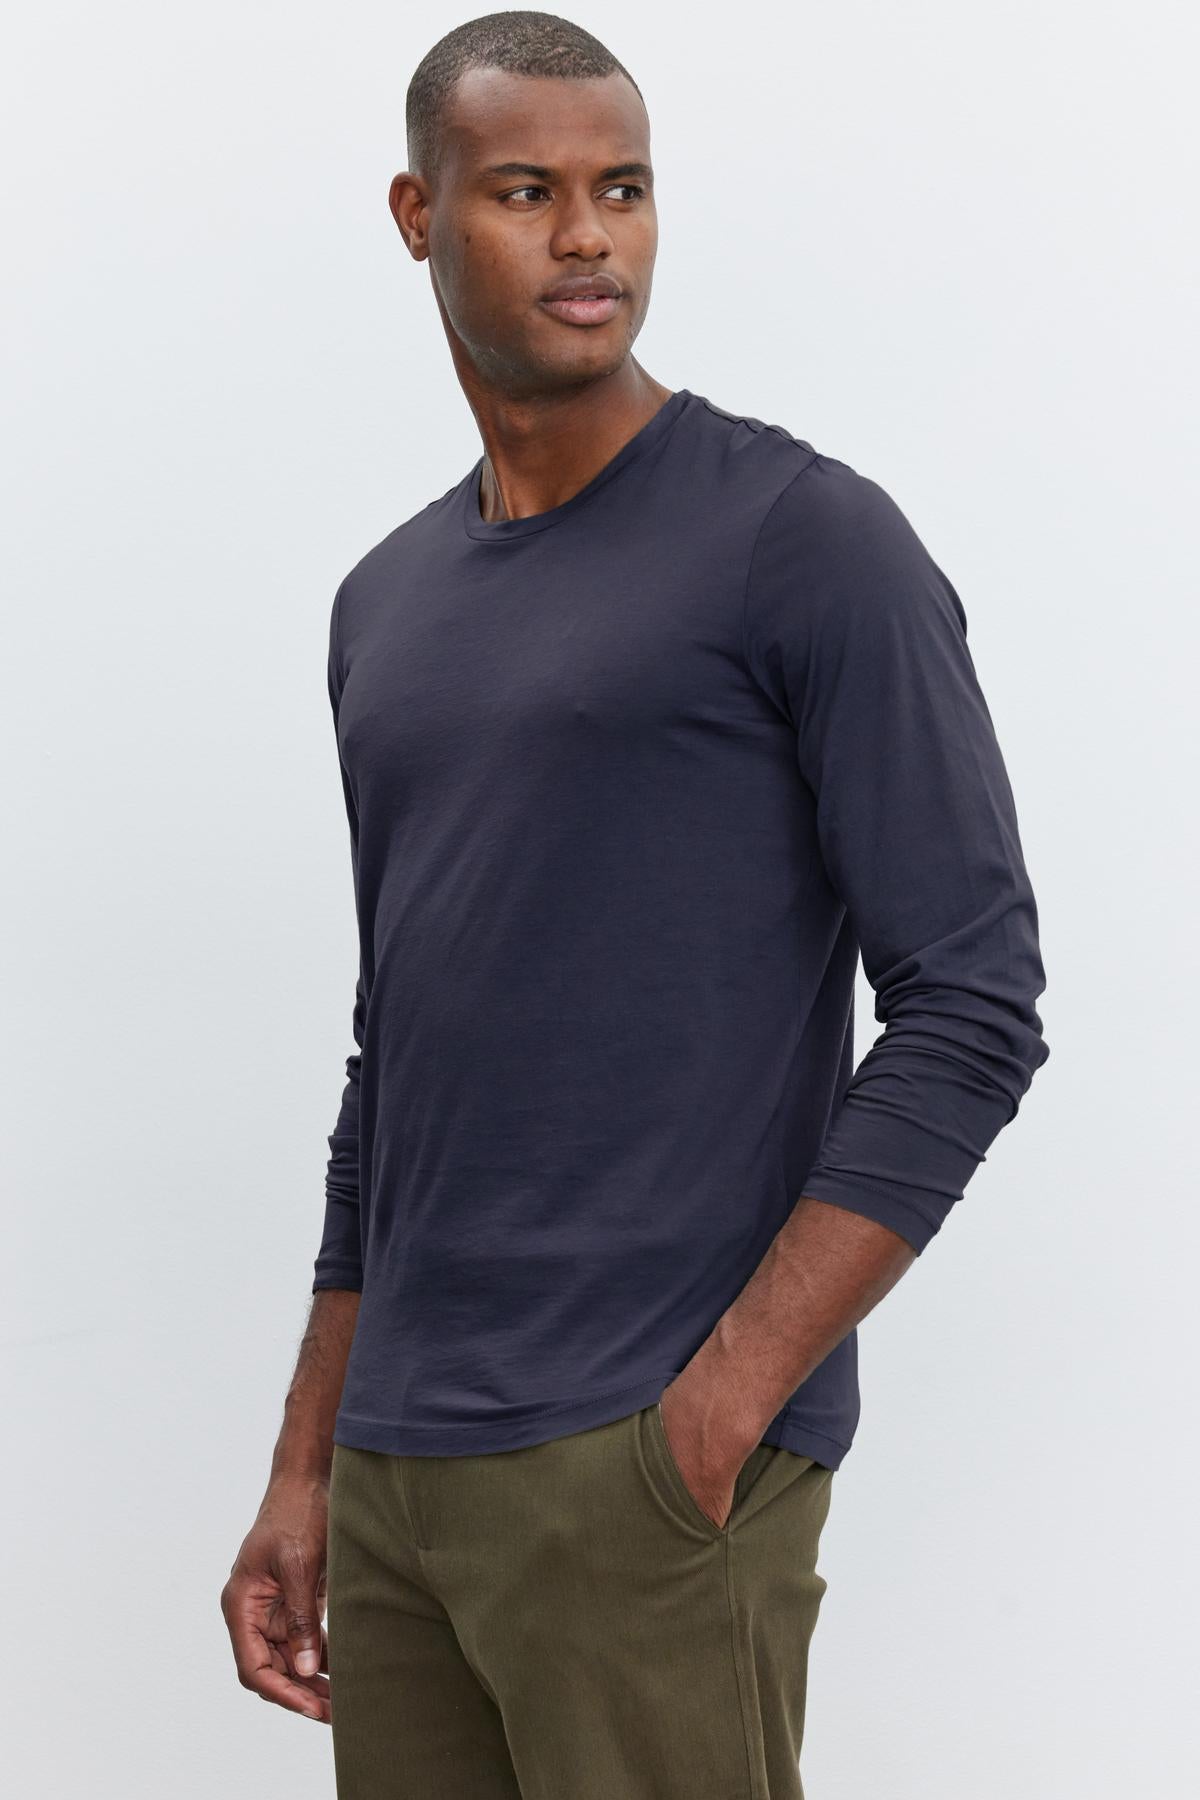 A man in a Velvet by Graham & Spencer Skeeter Whisper Classic Crew Neck Tee and olive pants stands against a plain background, looking to the side.-36342439313601